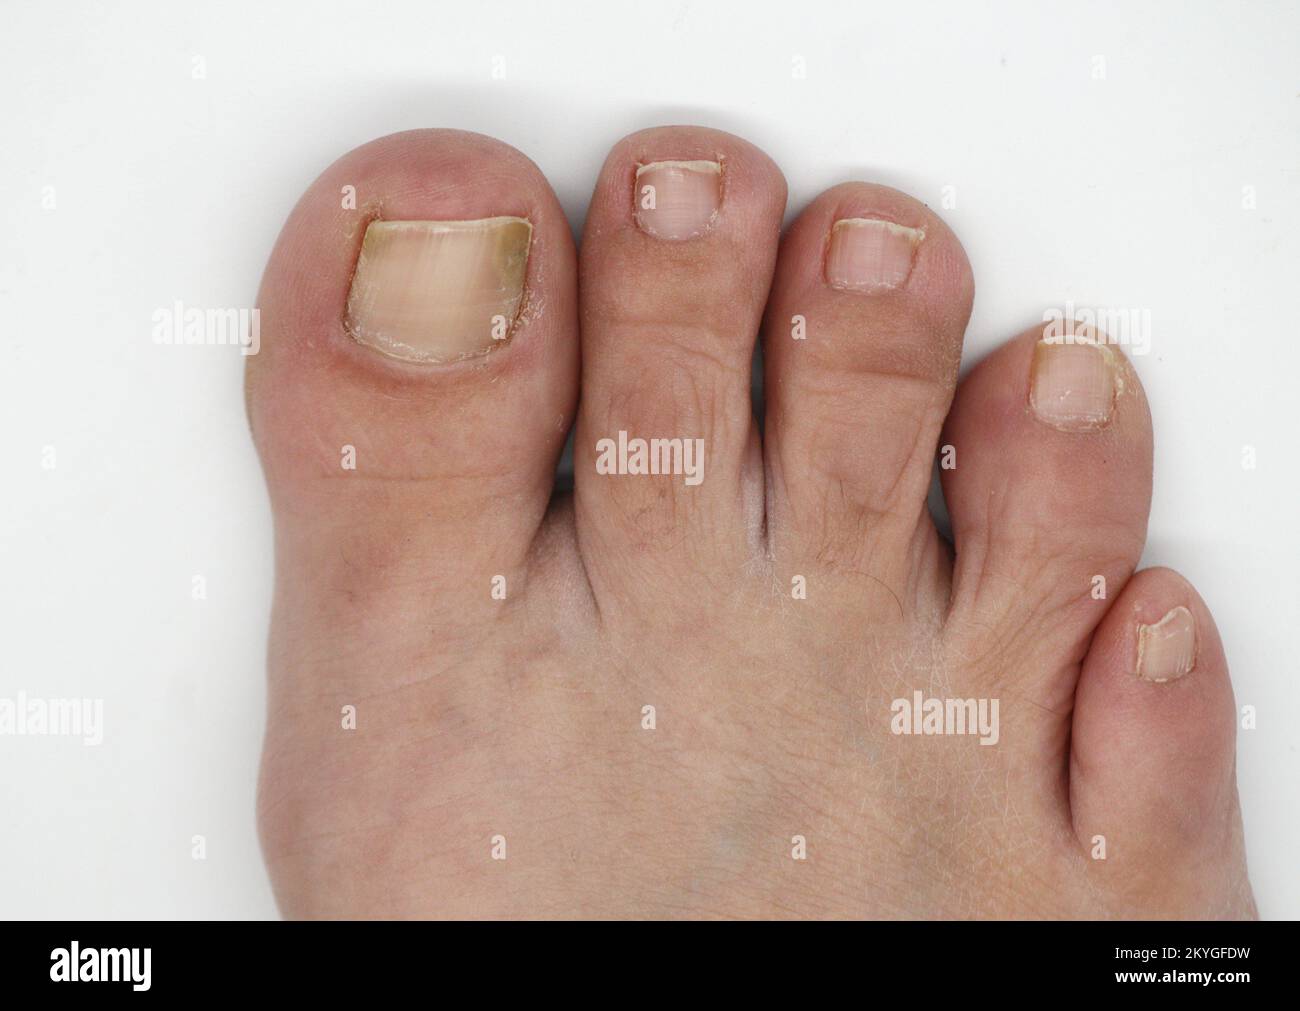 Big toe nail of a person suffering from onychomycosis, a fungal infection that causes yellowing of the nail Stock Photo